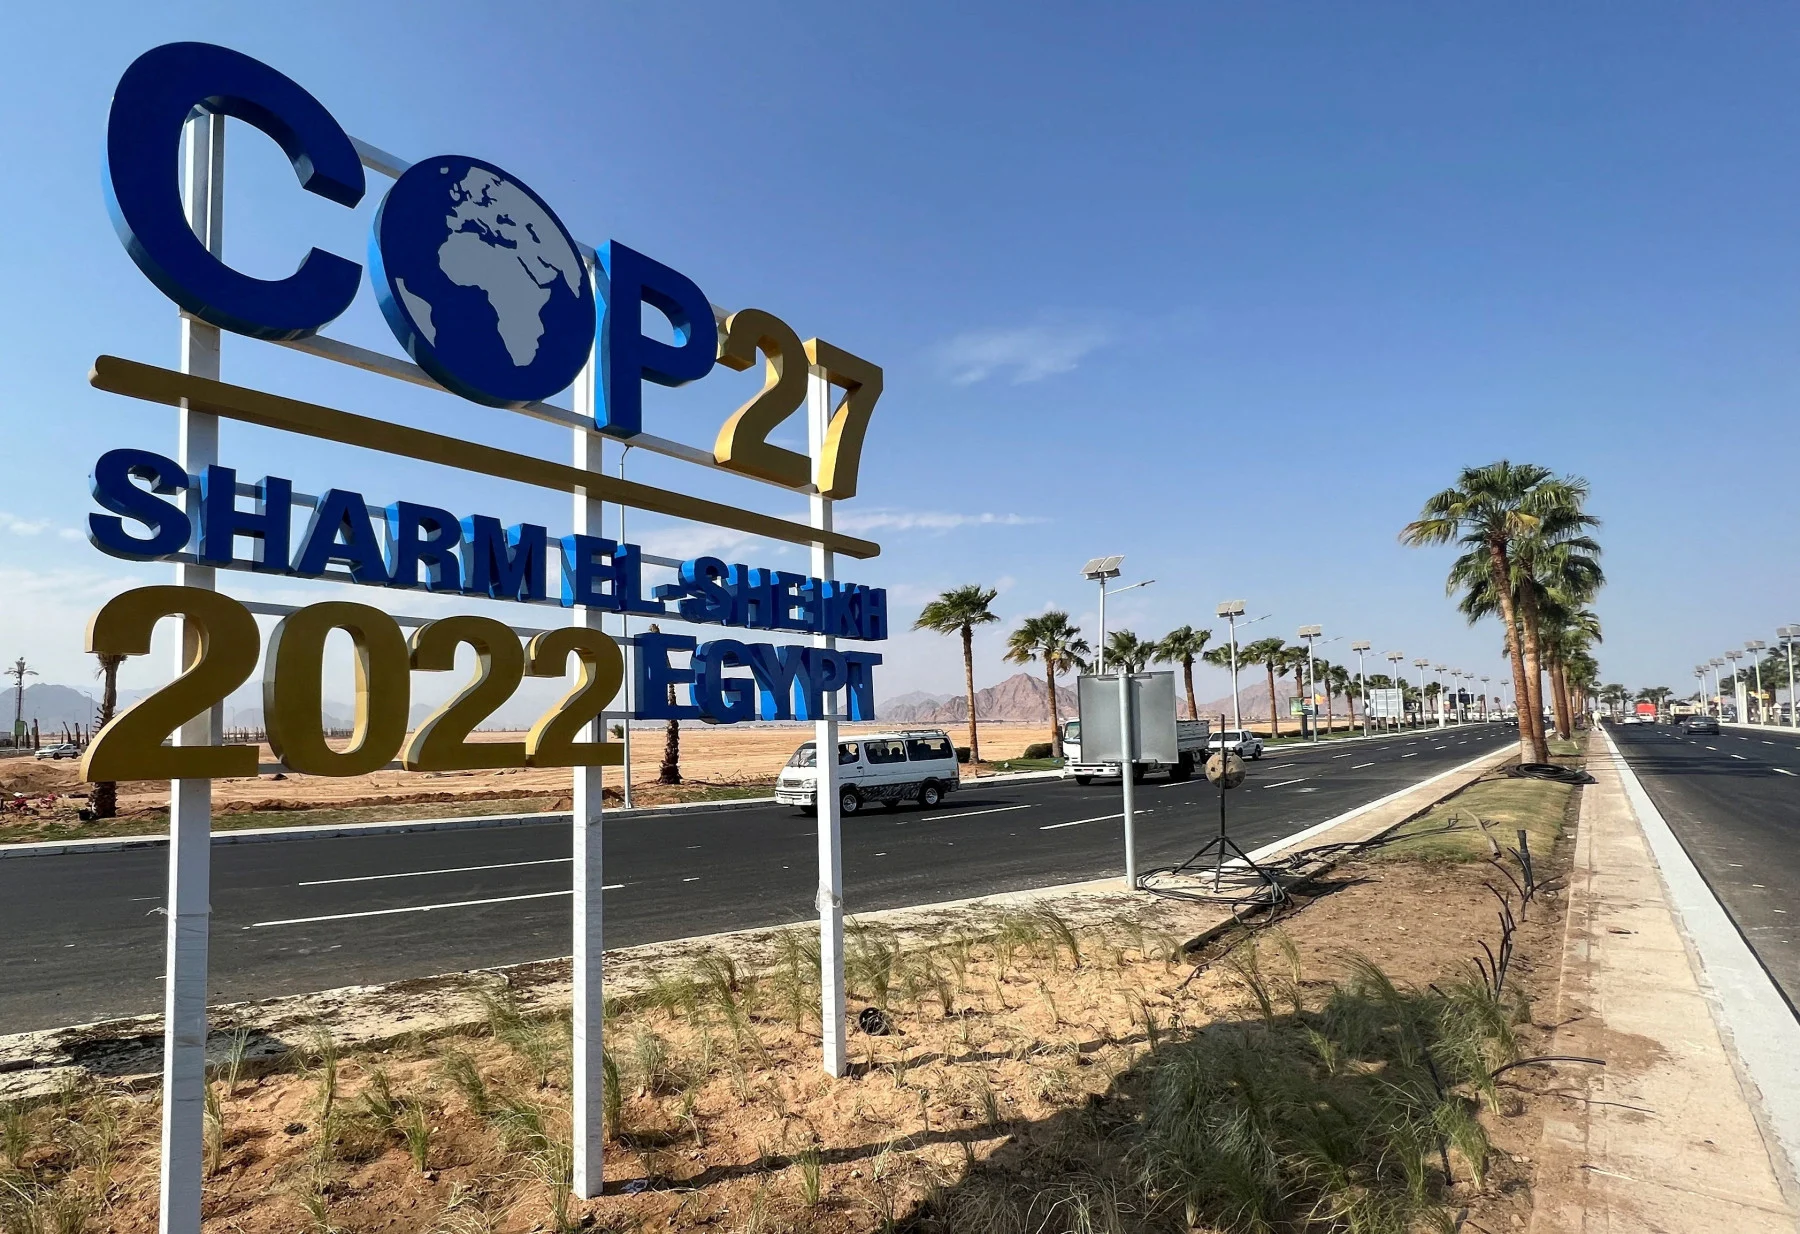 View of a COP27 sign on the road leading to the conference area in Egypt's Red Sea resort of Sharm el-Sheikh town as the city prepares to host the COP27 summit next month, in Sharm el-Sheikh, Egypt October 20, 2022. REUTERS/Sayed Sheasha/File Photo